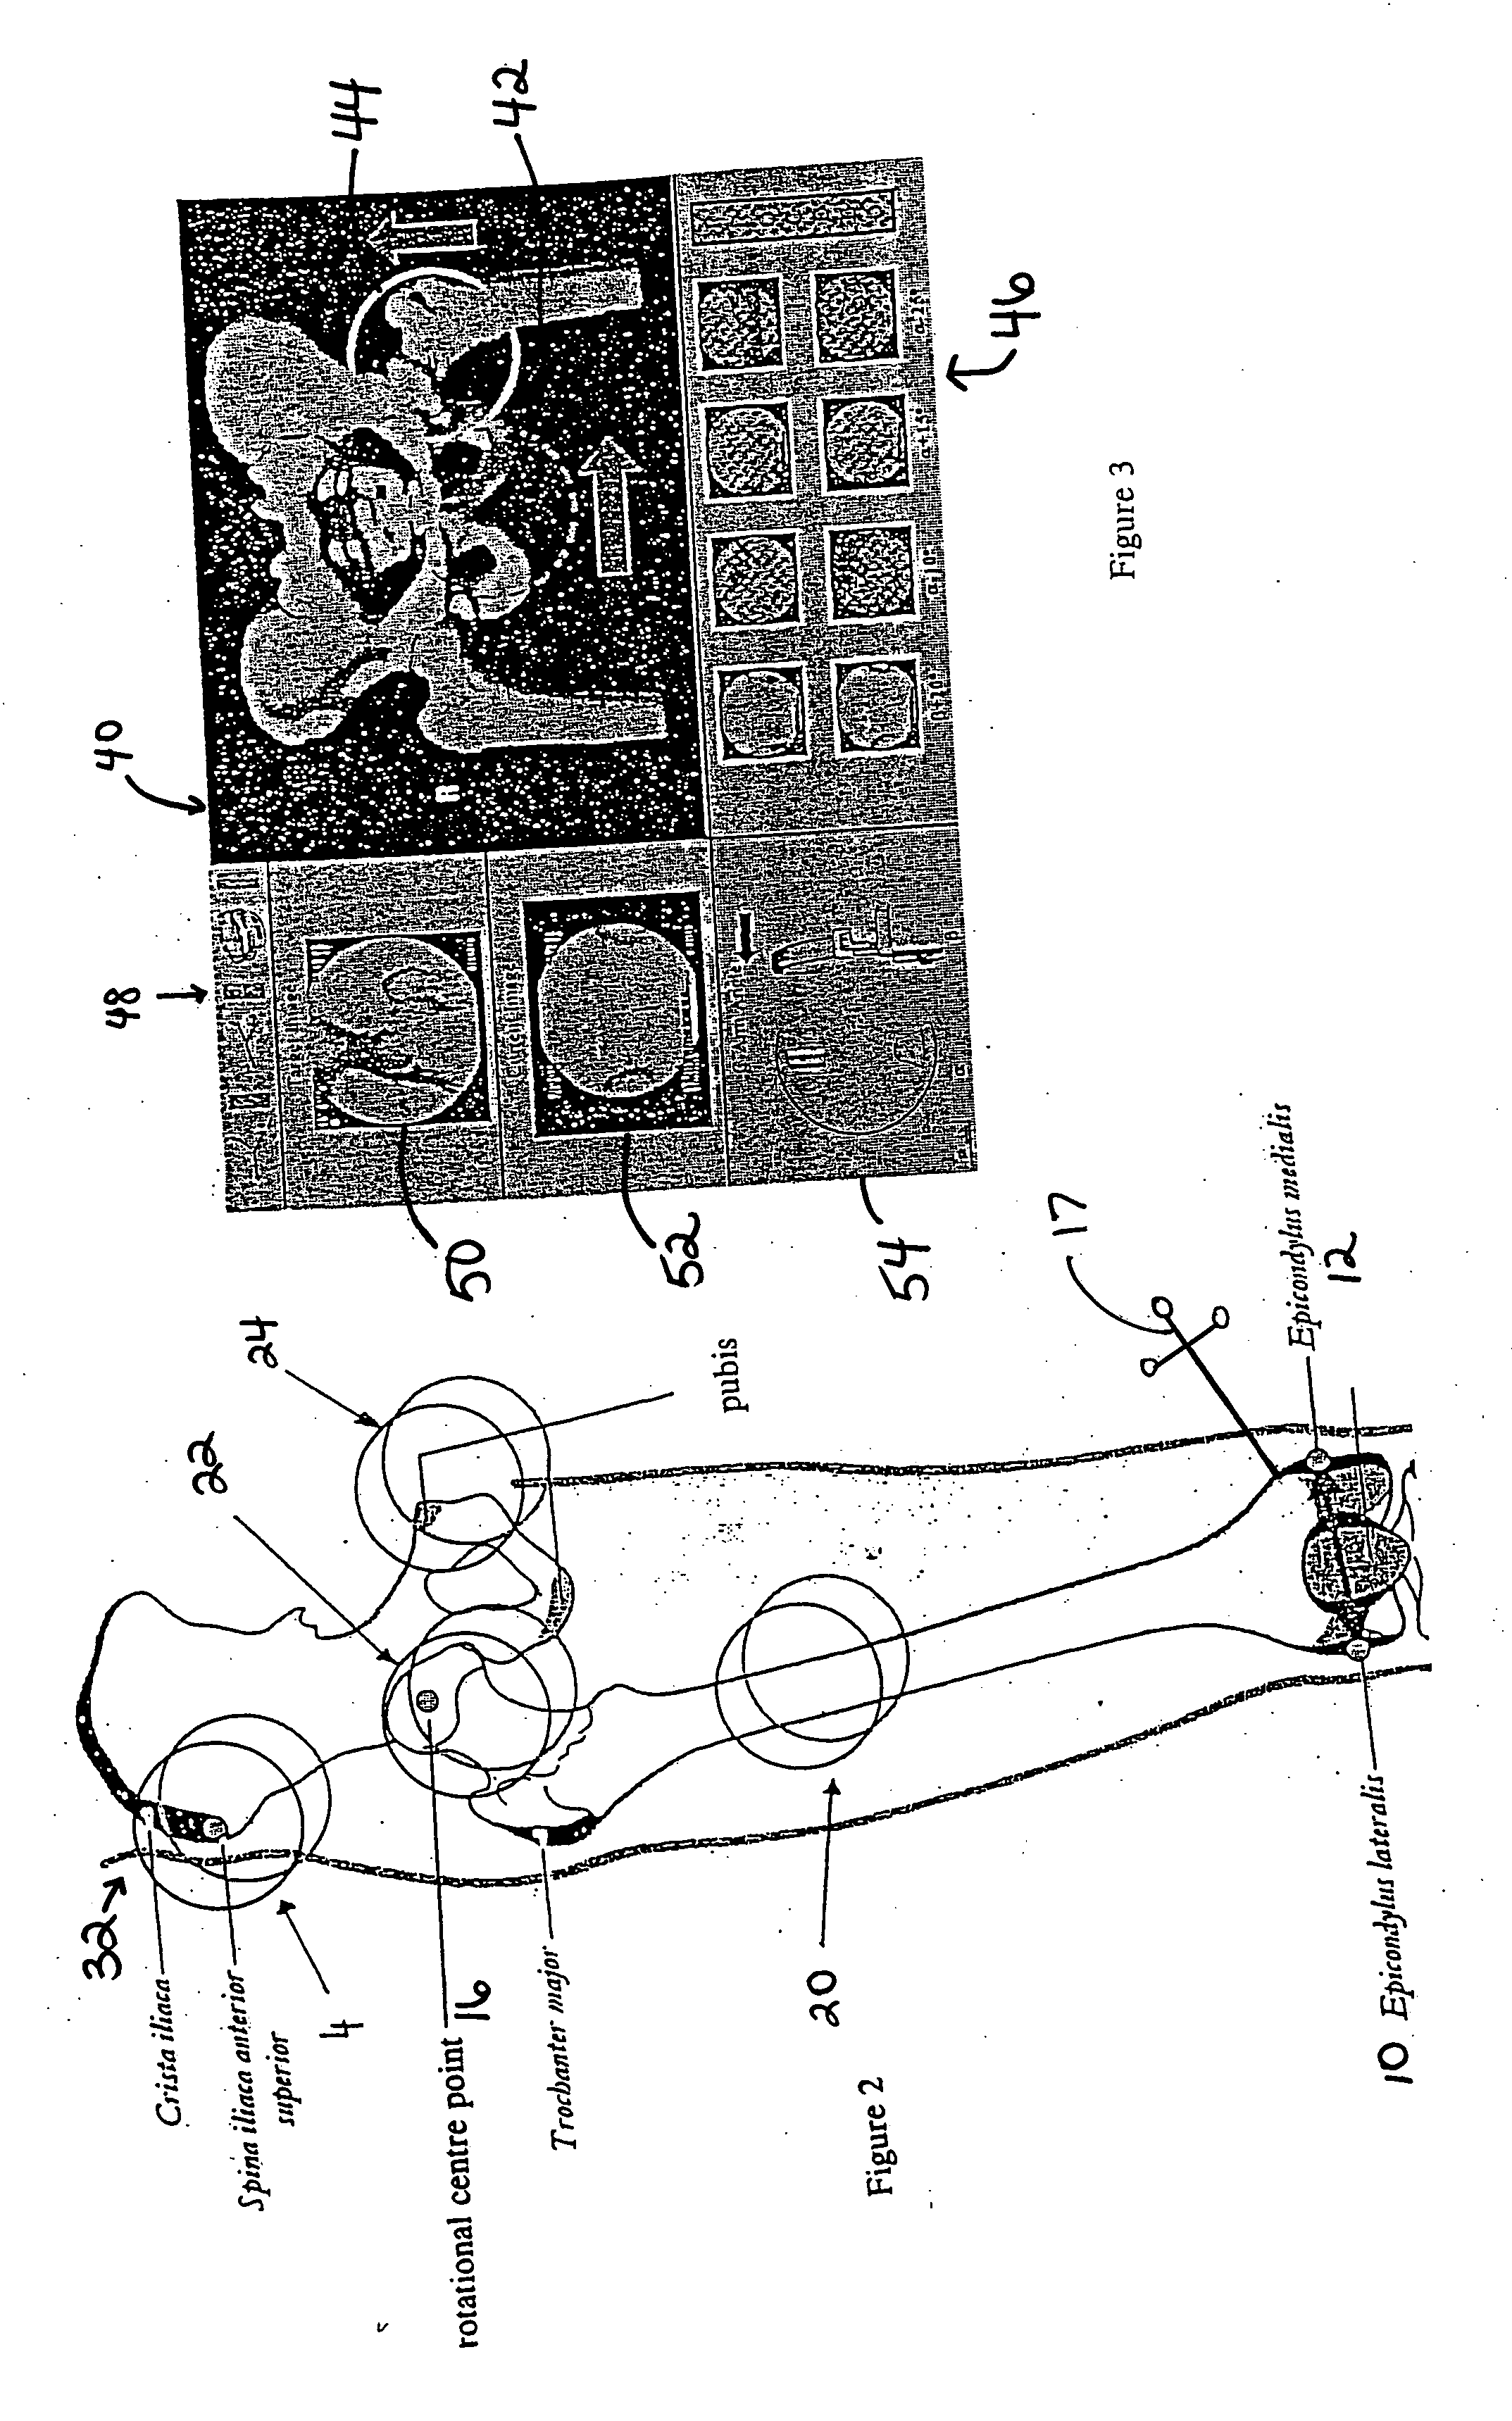 Method and system for generating three-dimensional model of part of a body from fluoroscopy image data and specific landmarks